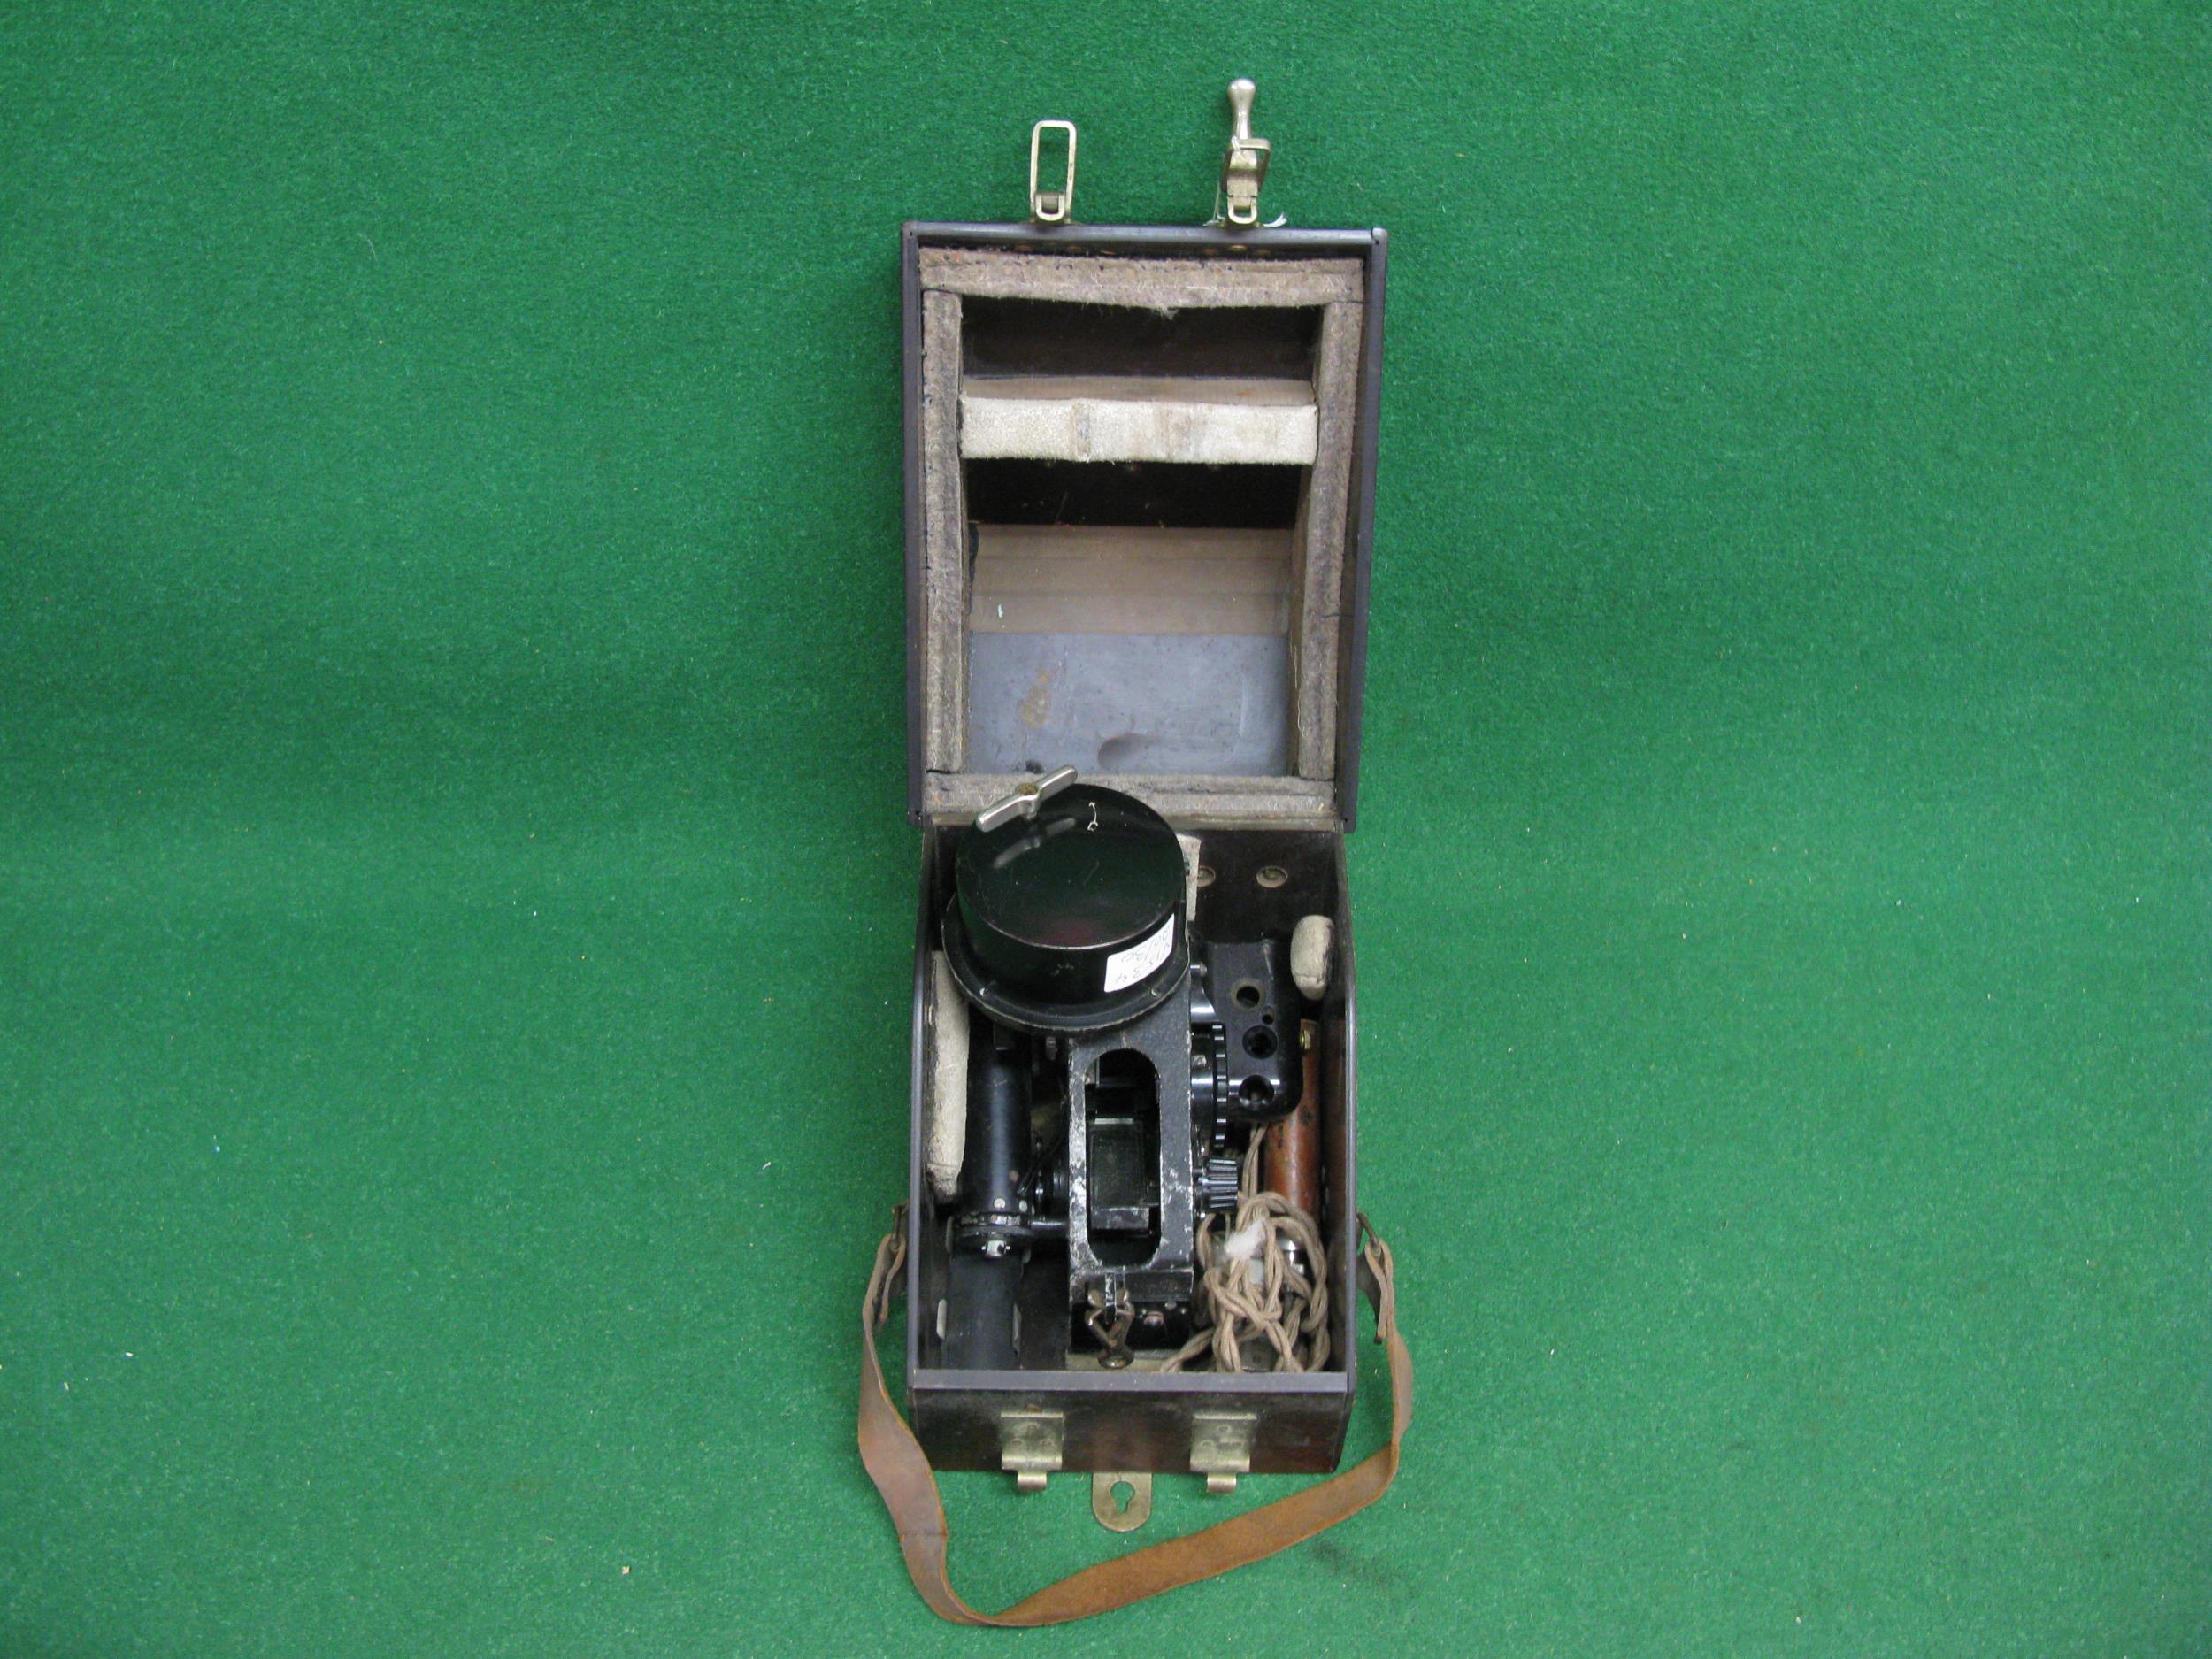 WWII portable cased bubble sextant Mk1XA which was a navigation aid used in aircraft Please note